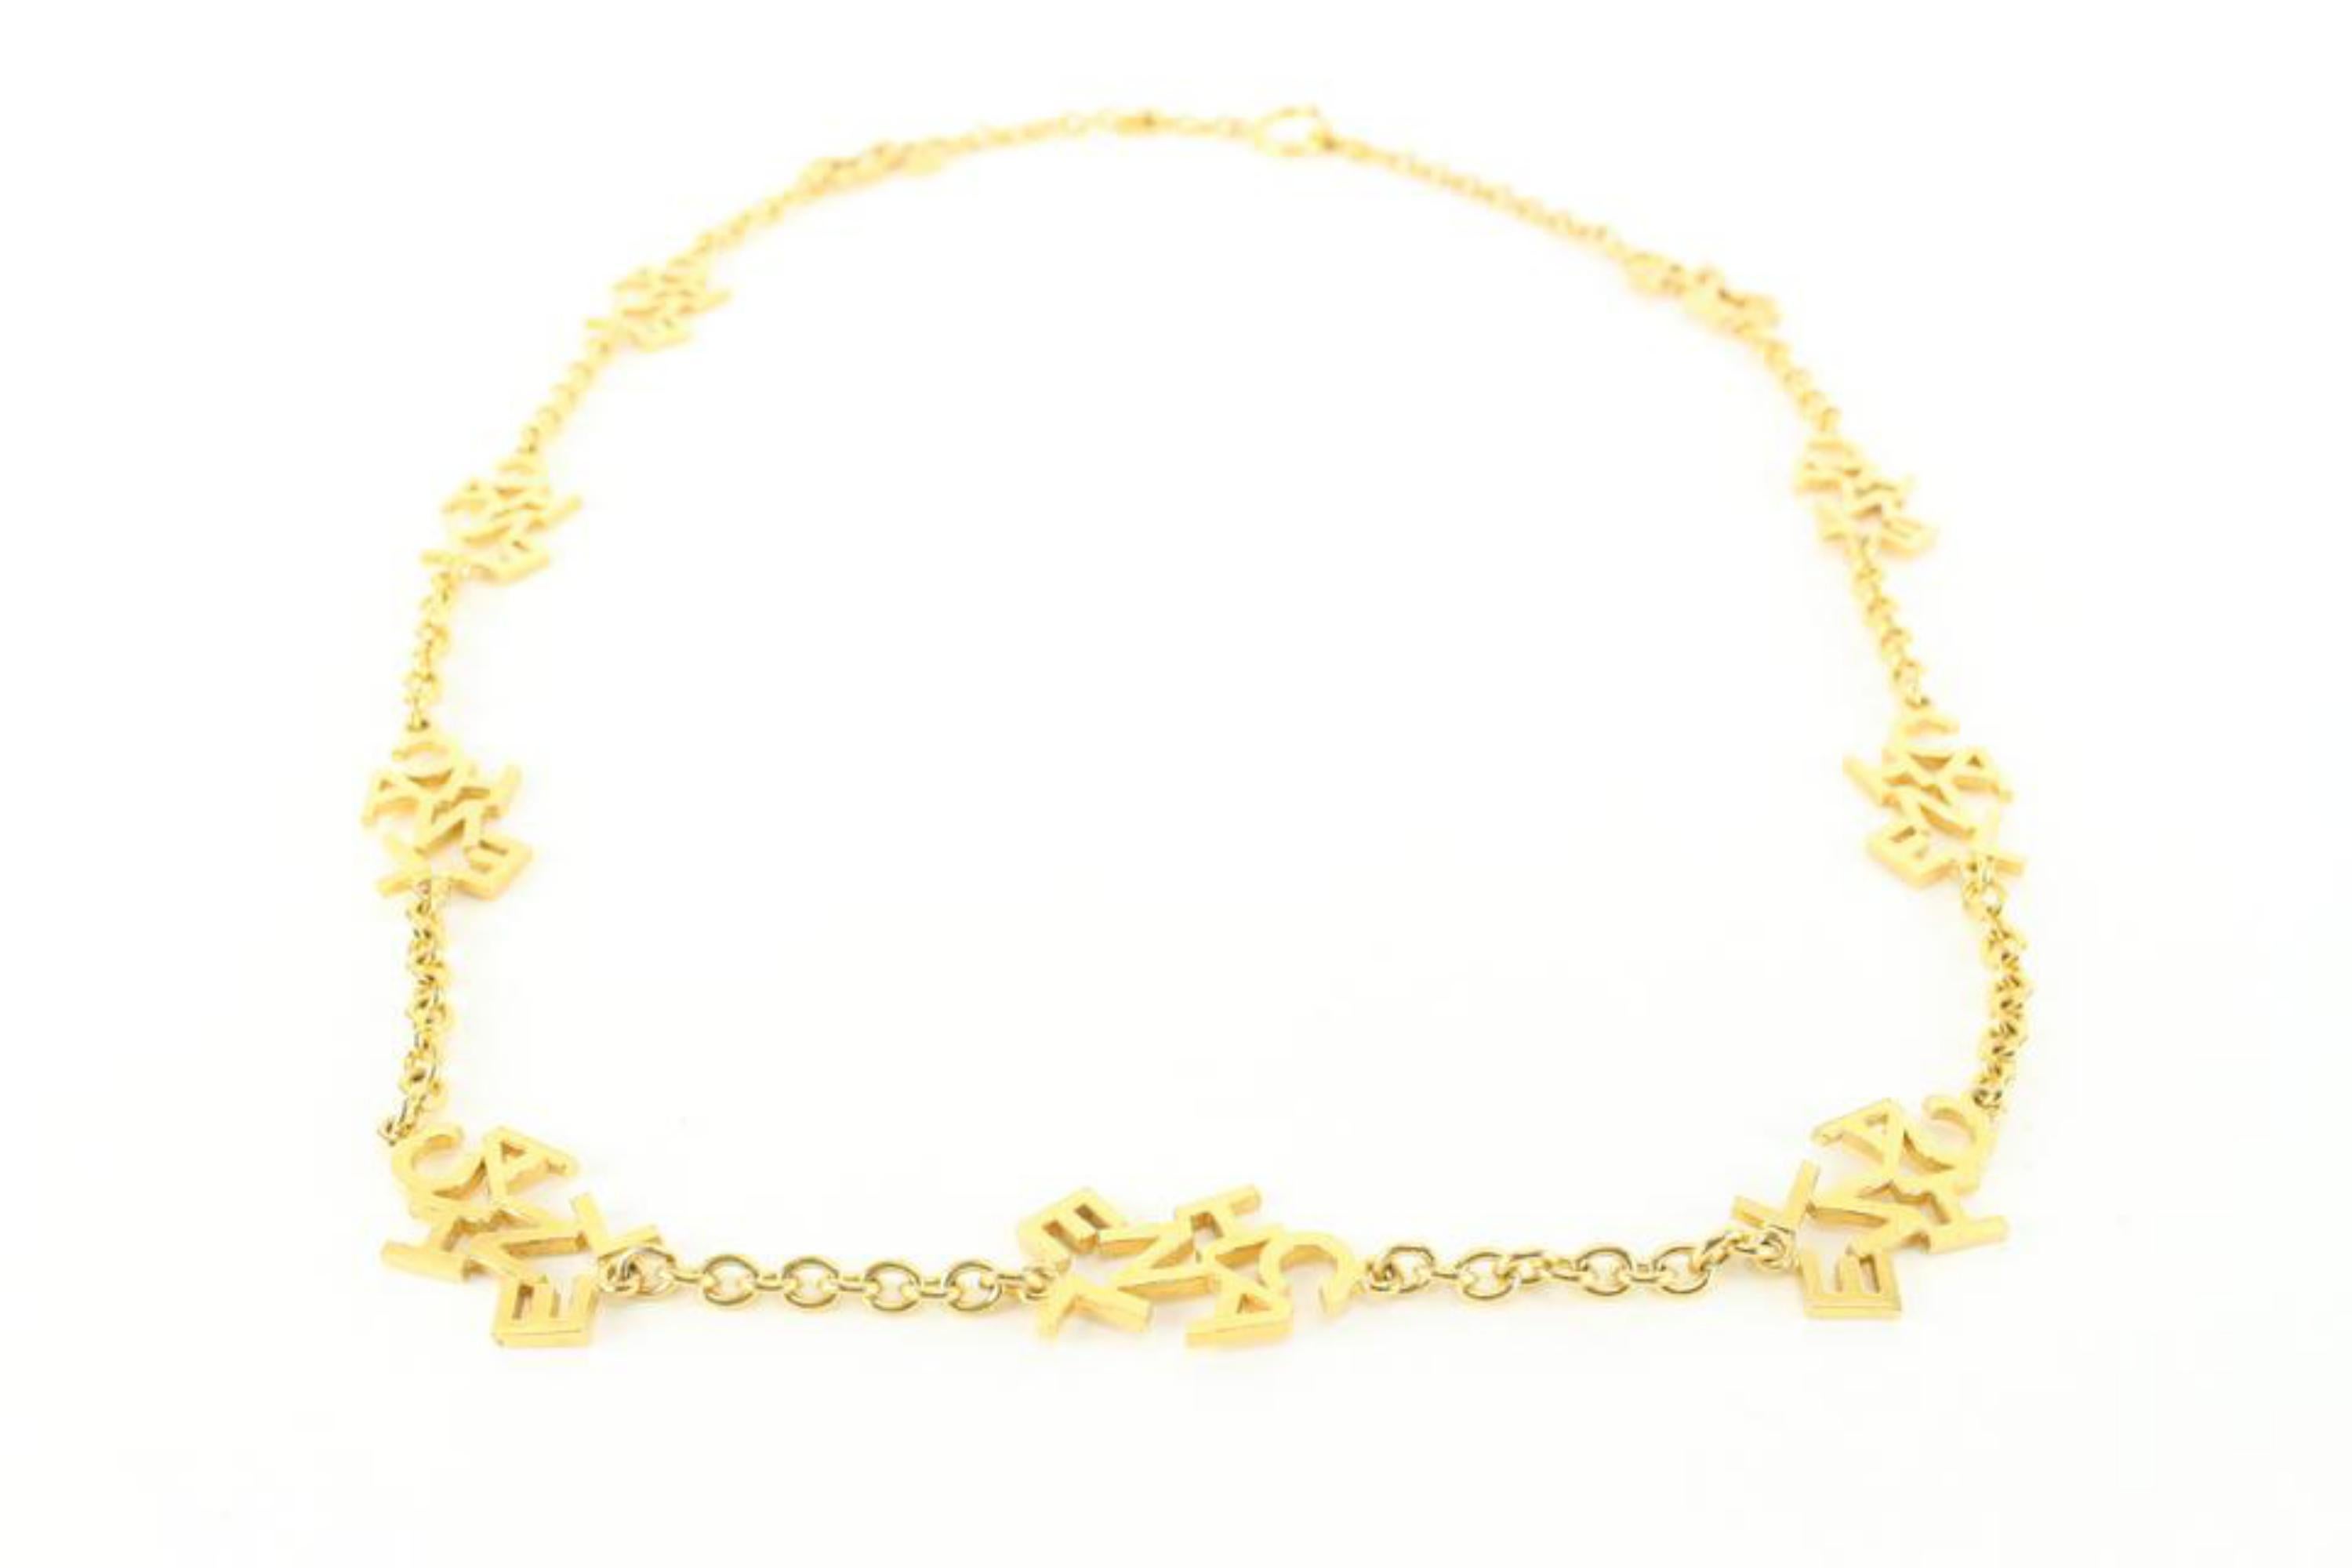 Chanel 24K Gold Plated CC Logo All Over Chain Necklace 79ck817s 2